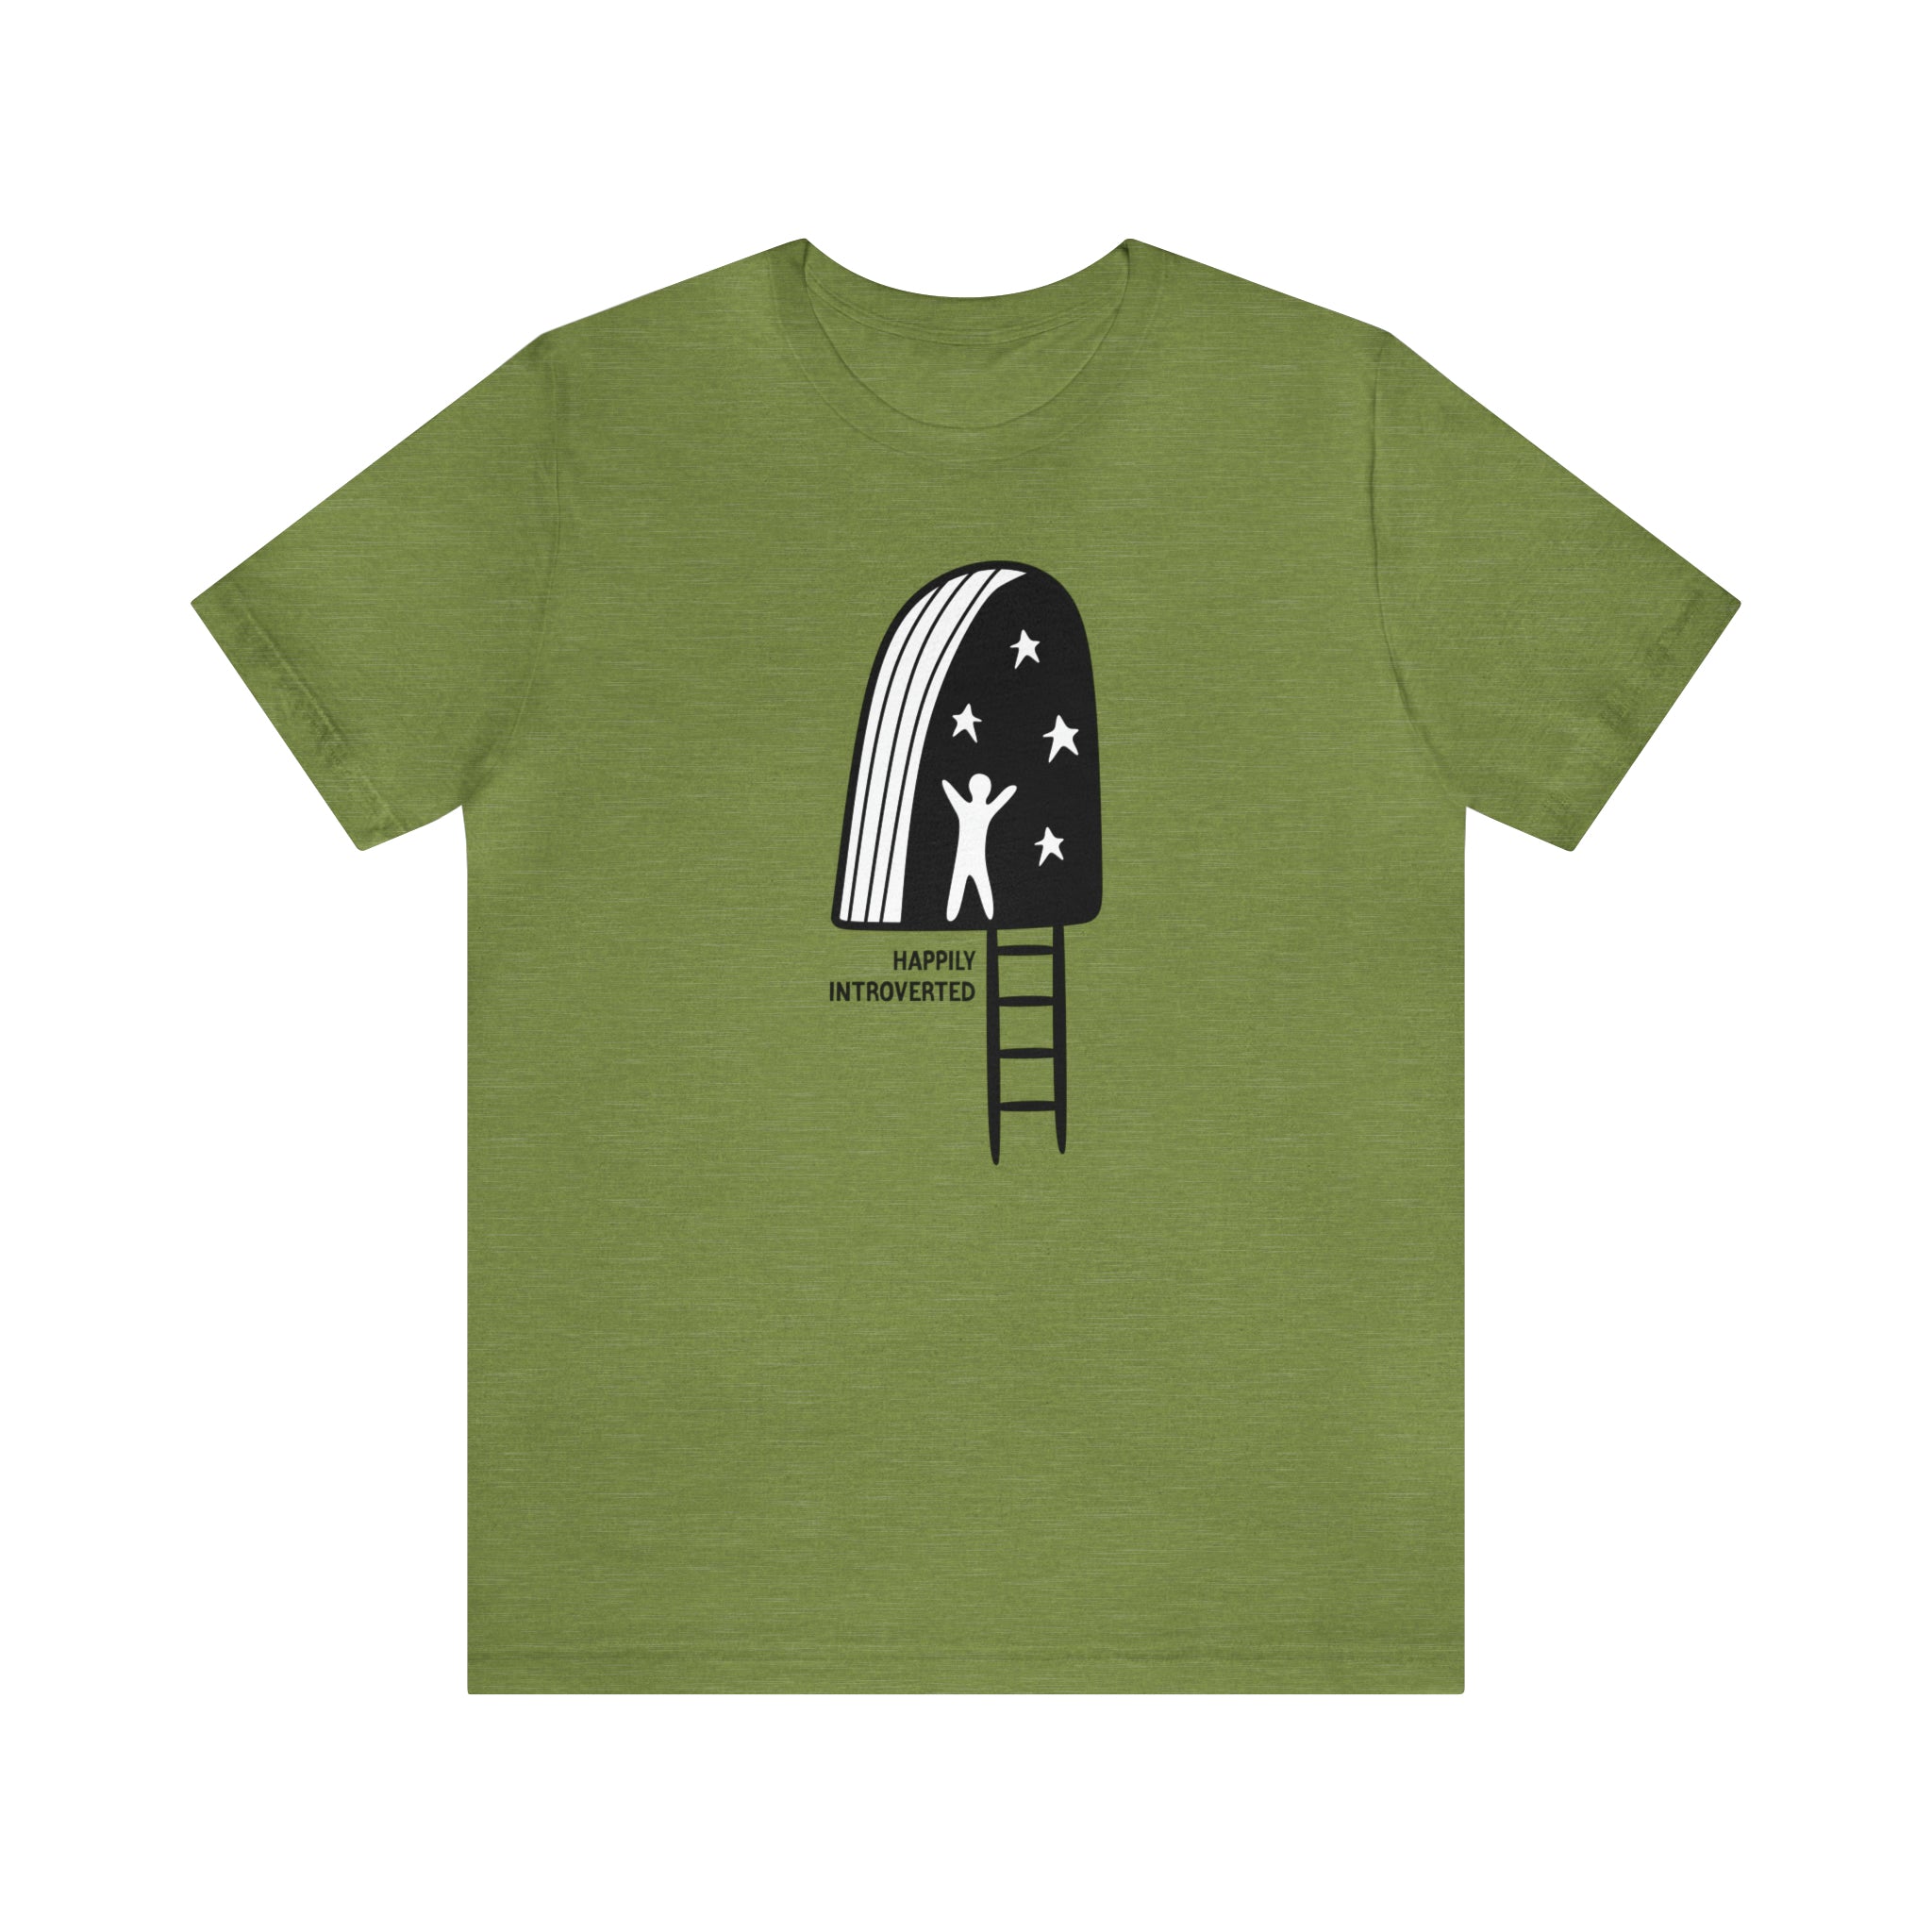 A Happily Introverted T-Shirt with a person drawing.